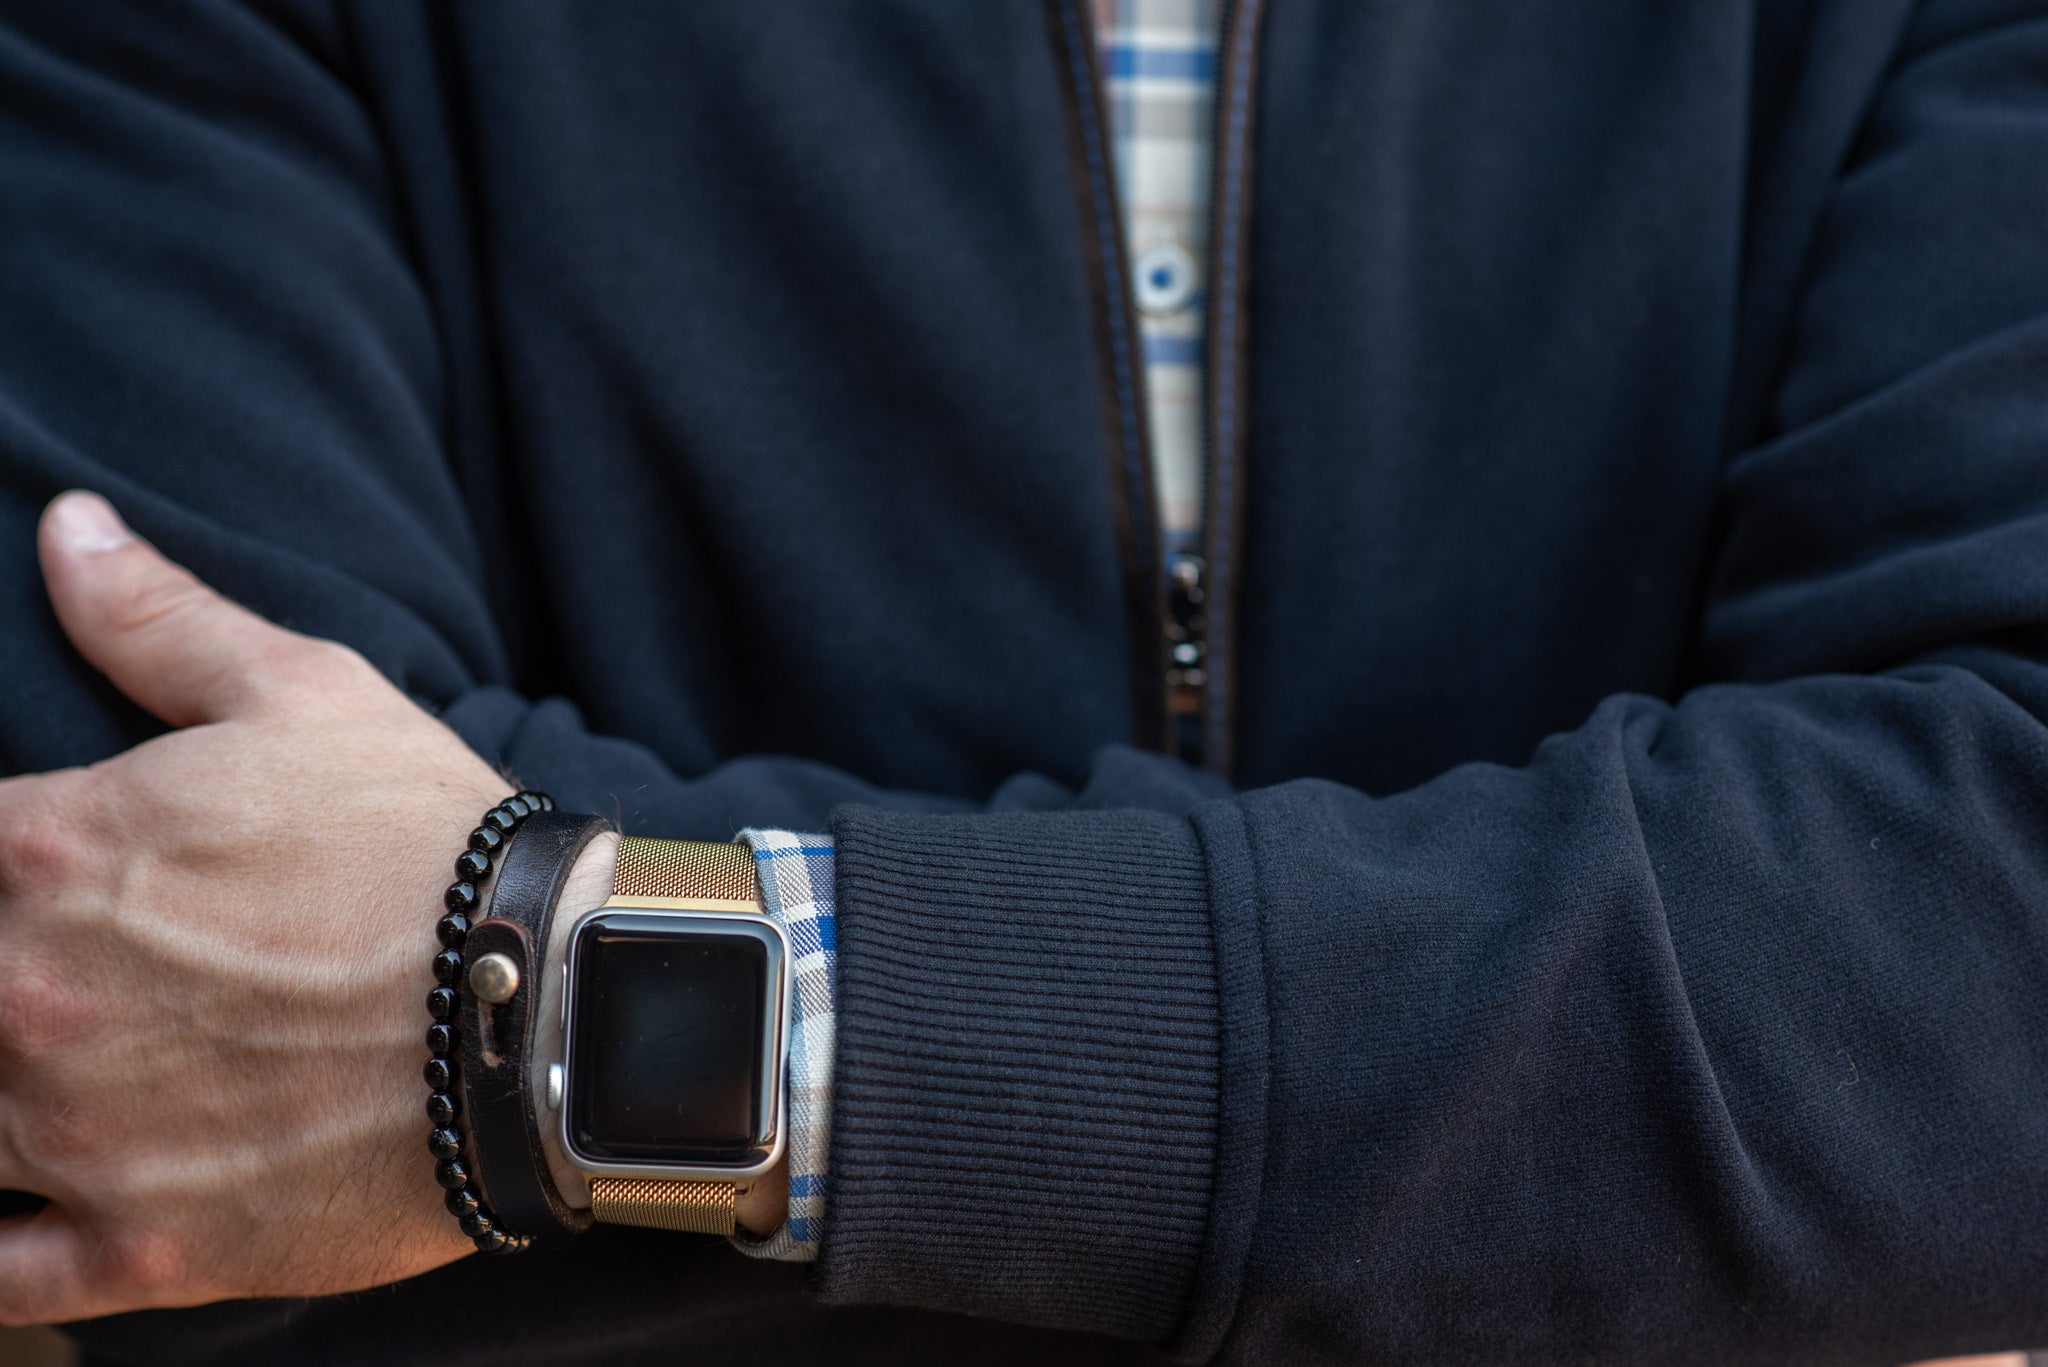 apple watch with bracelets and sweater